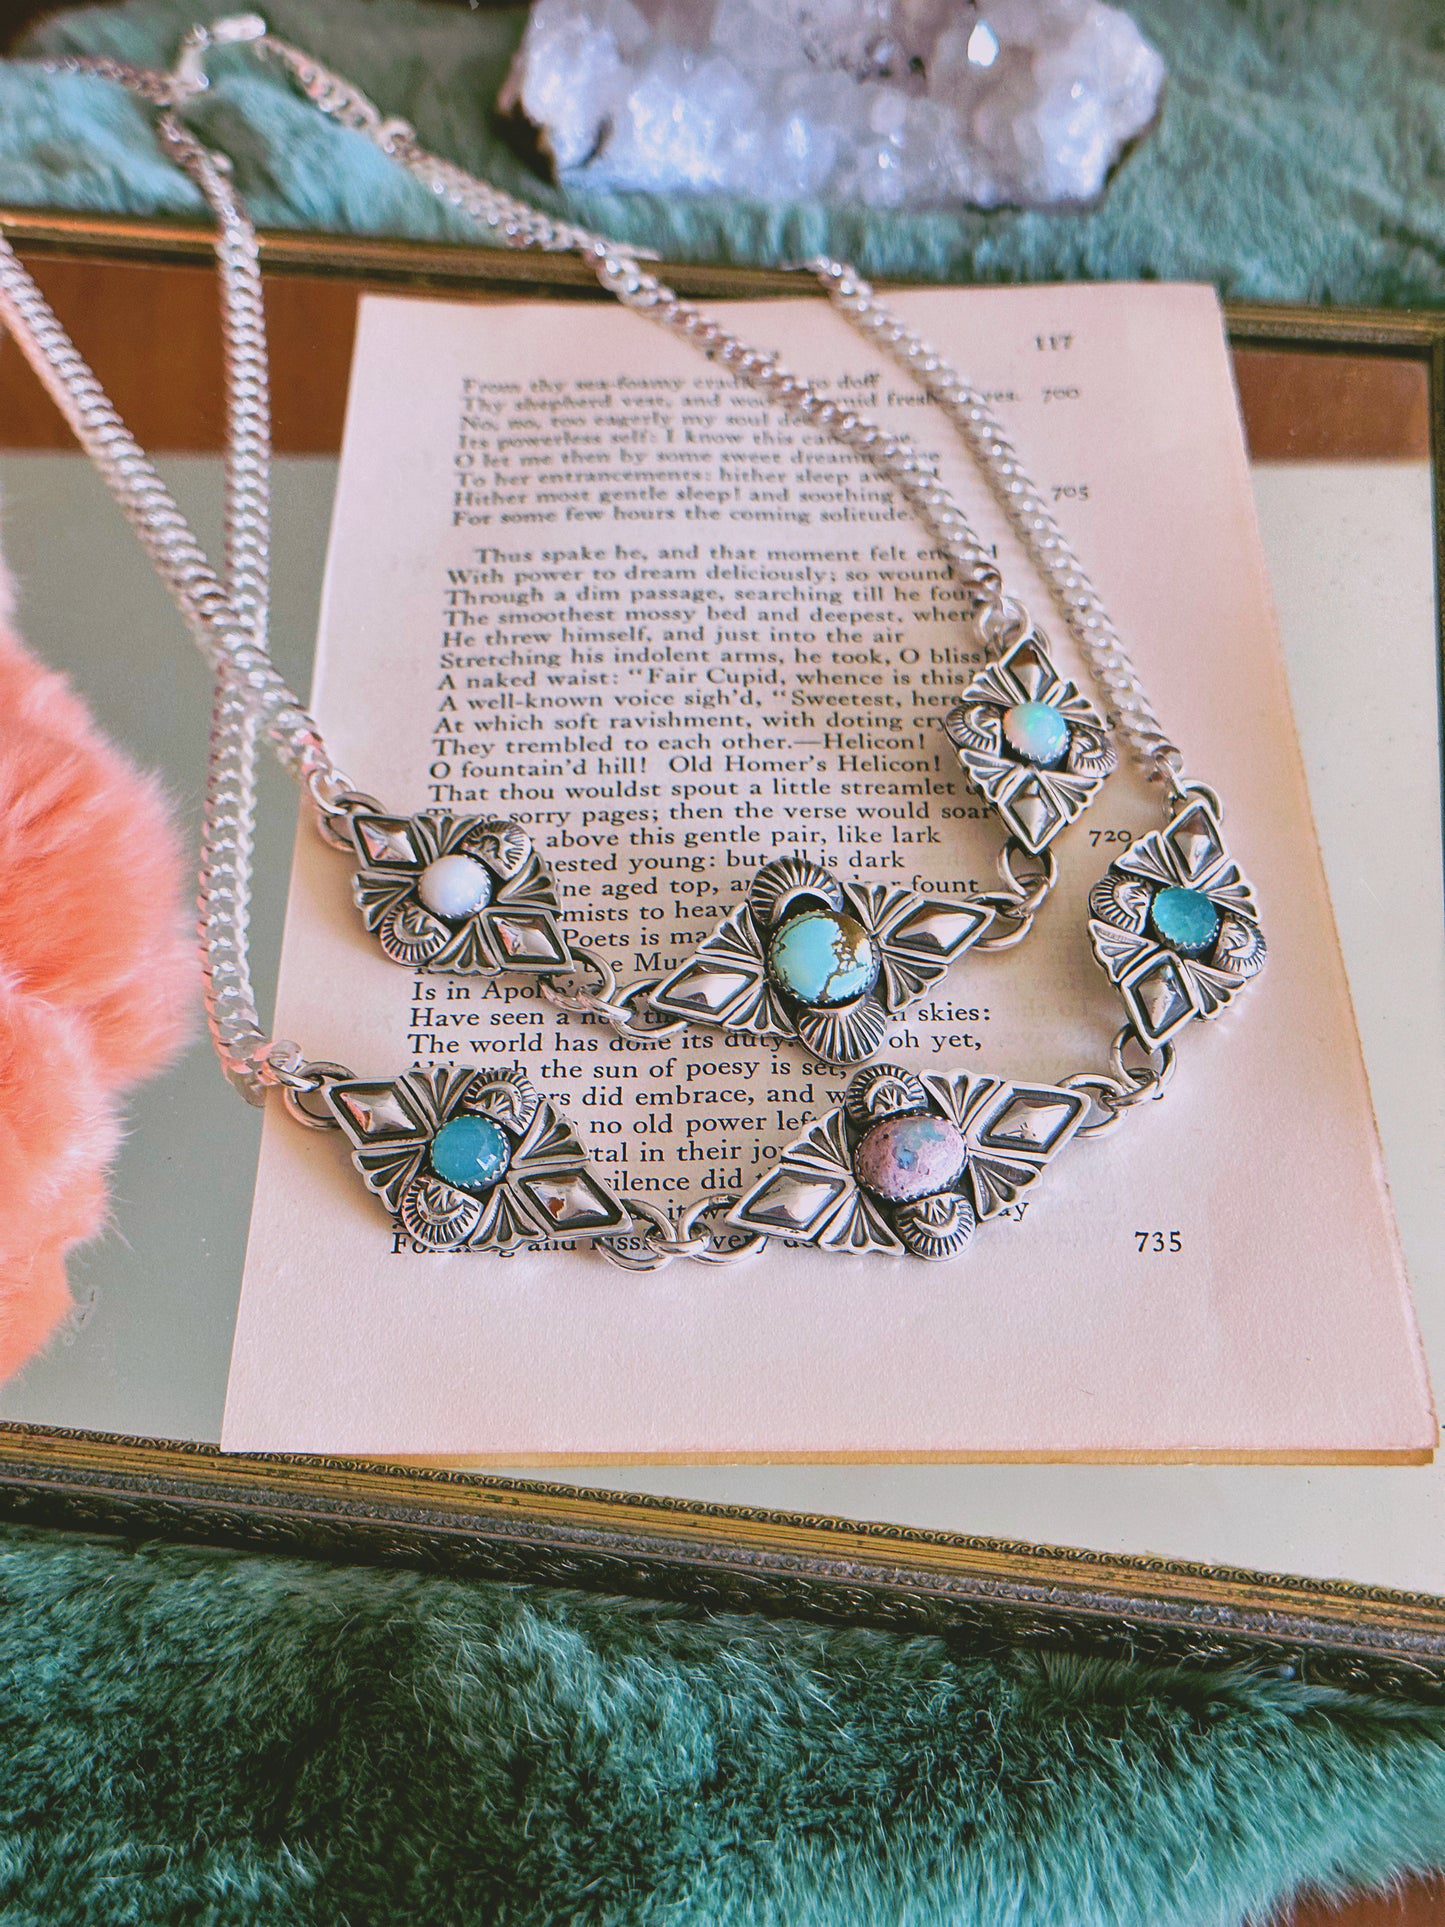 Heirloom Trinity Choker Necklace with Iron Maiden Turquoise and Ethiopian Opal